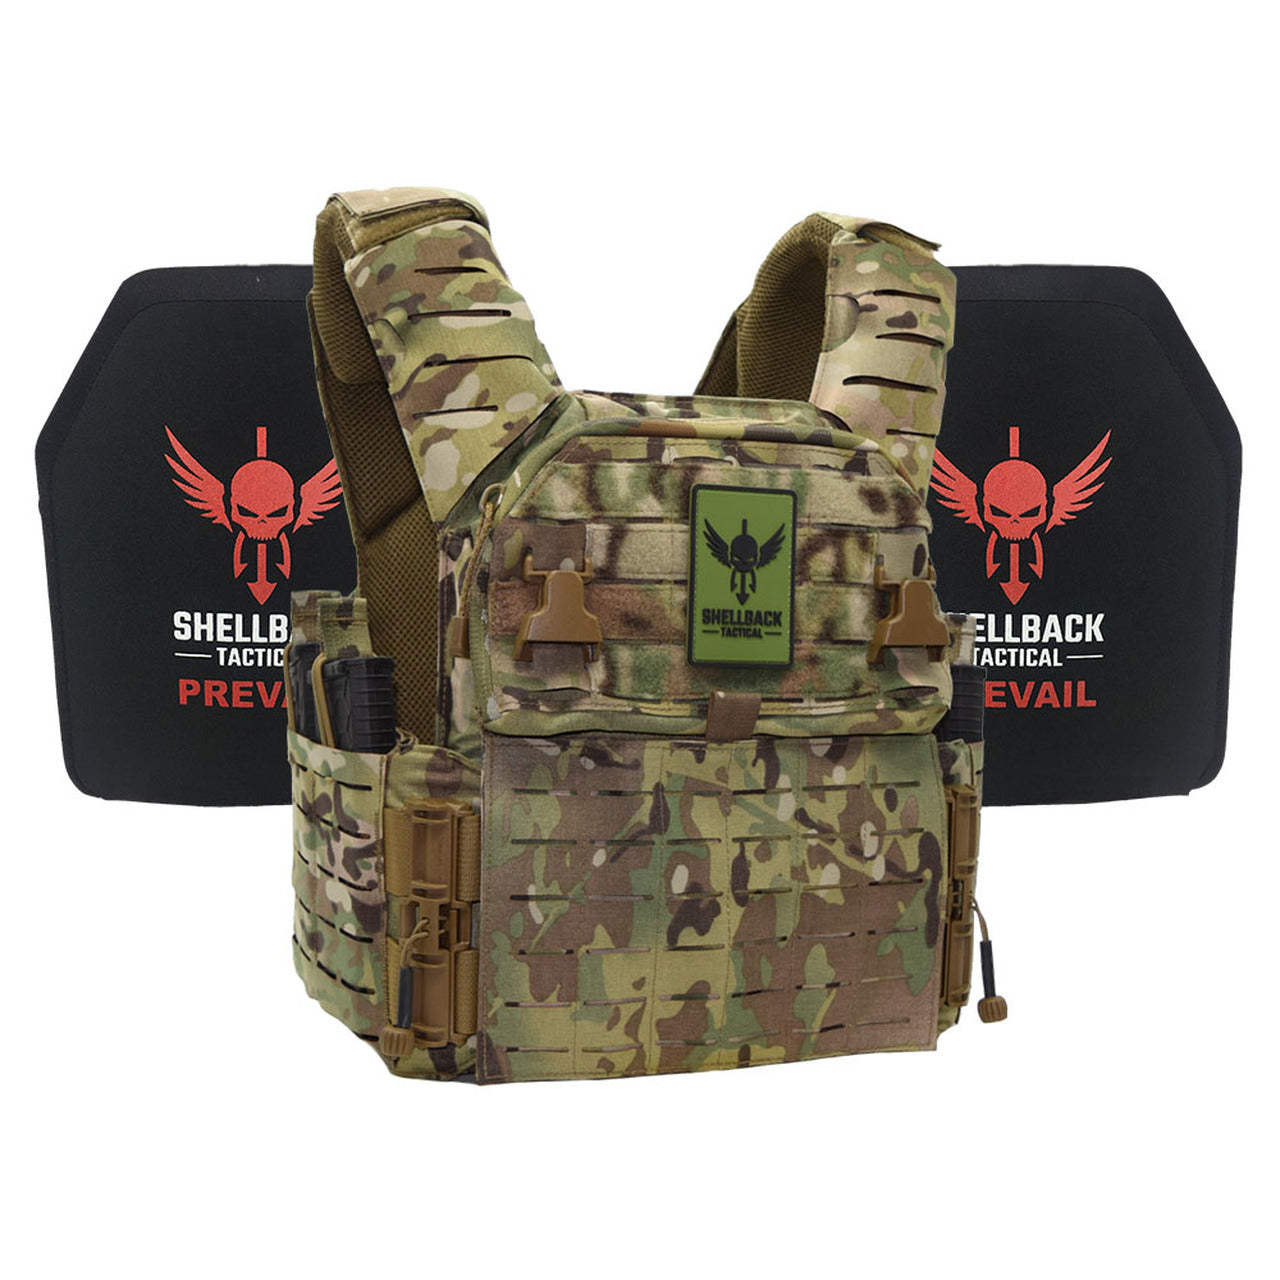 A Shellback Tactical Banshee Elite 3.0 Active Shooter Kit with Level IV 1155 Plates plate carrier with front and back plate protectors.